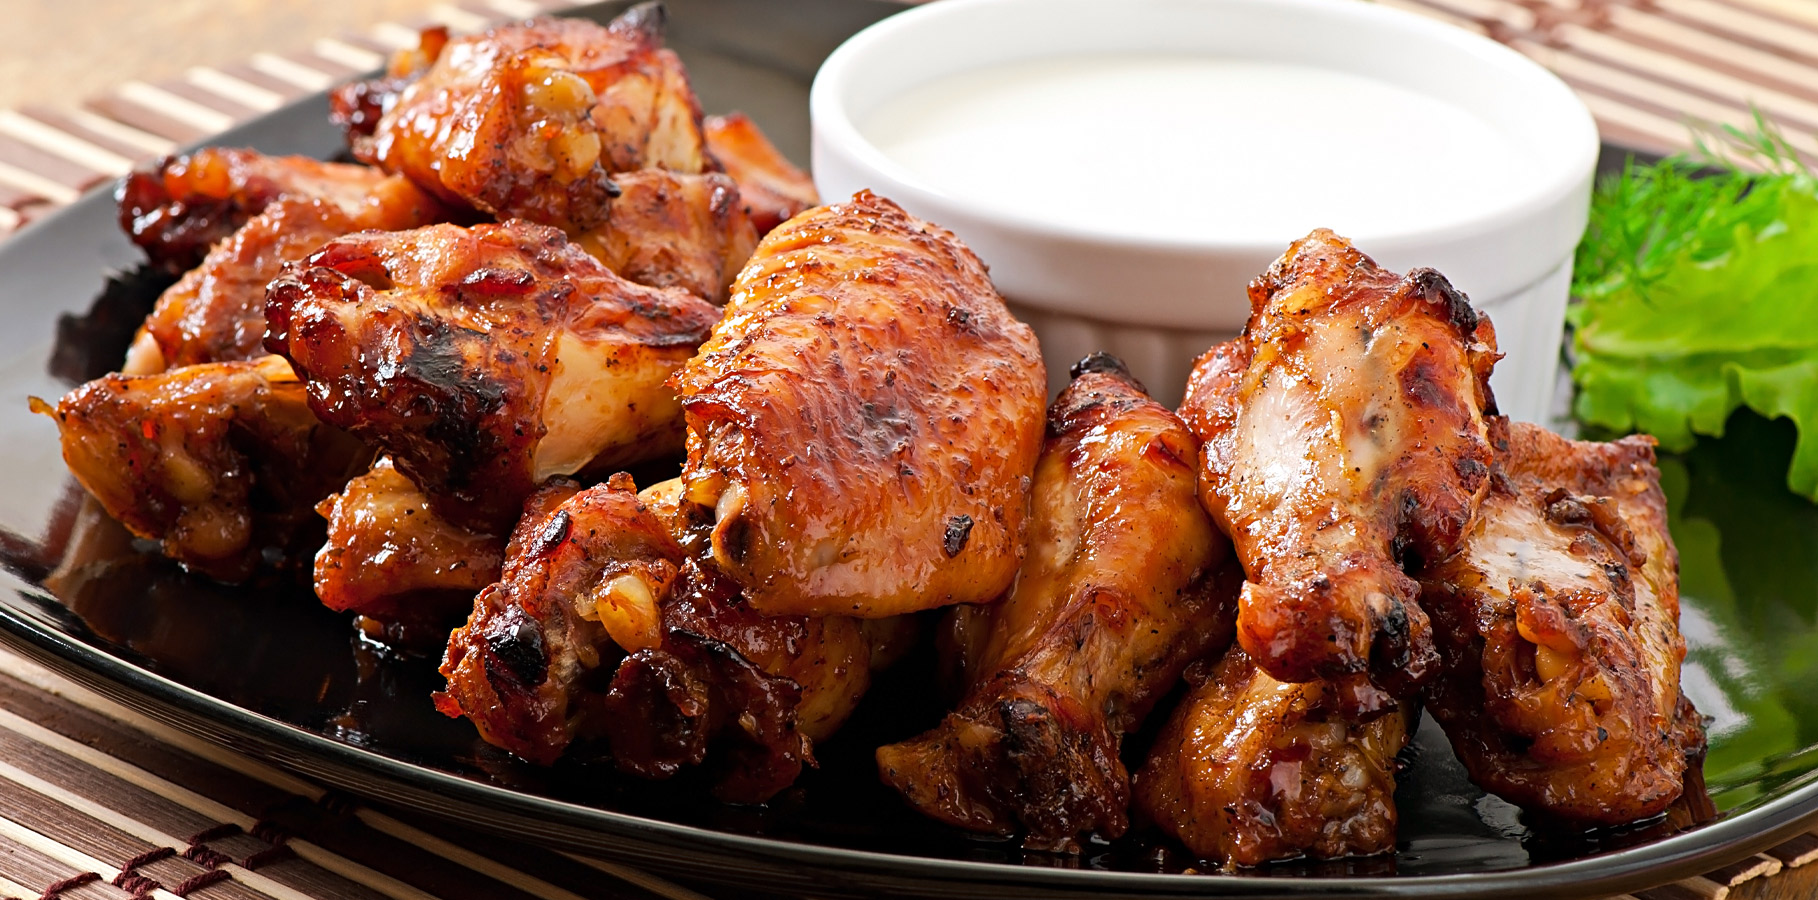 Try Our New Grilled Chicken Wings For £6.90!